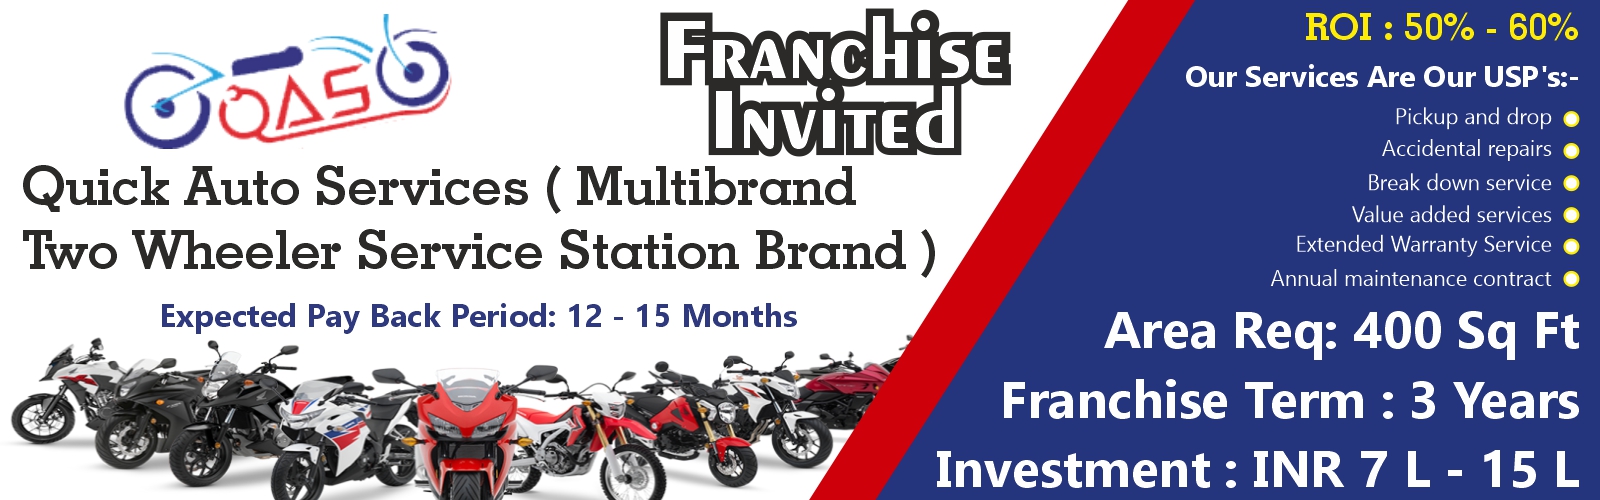 Franchise Apply - Business and Franchise Opportunities India